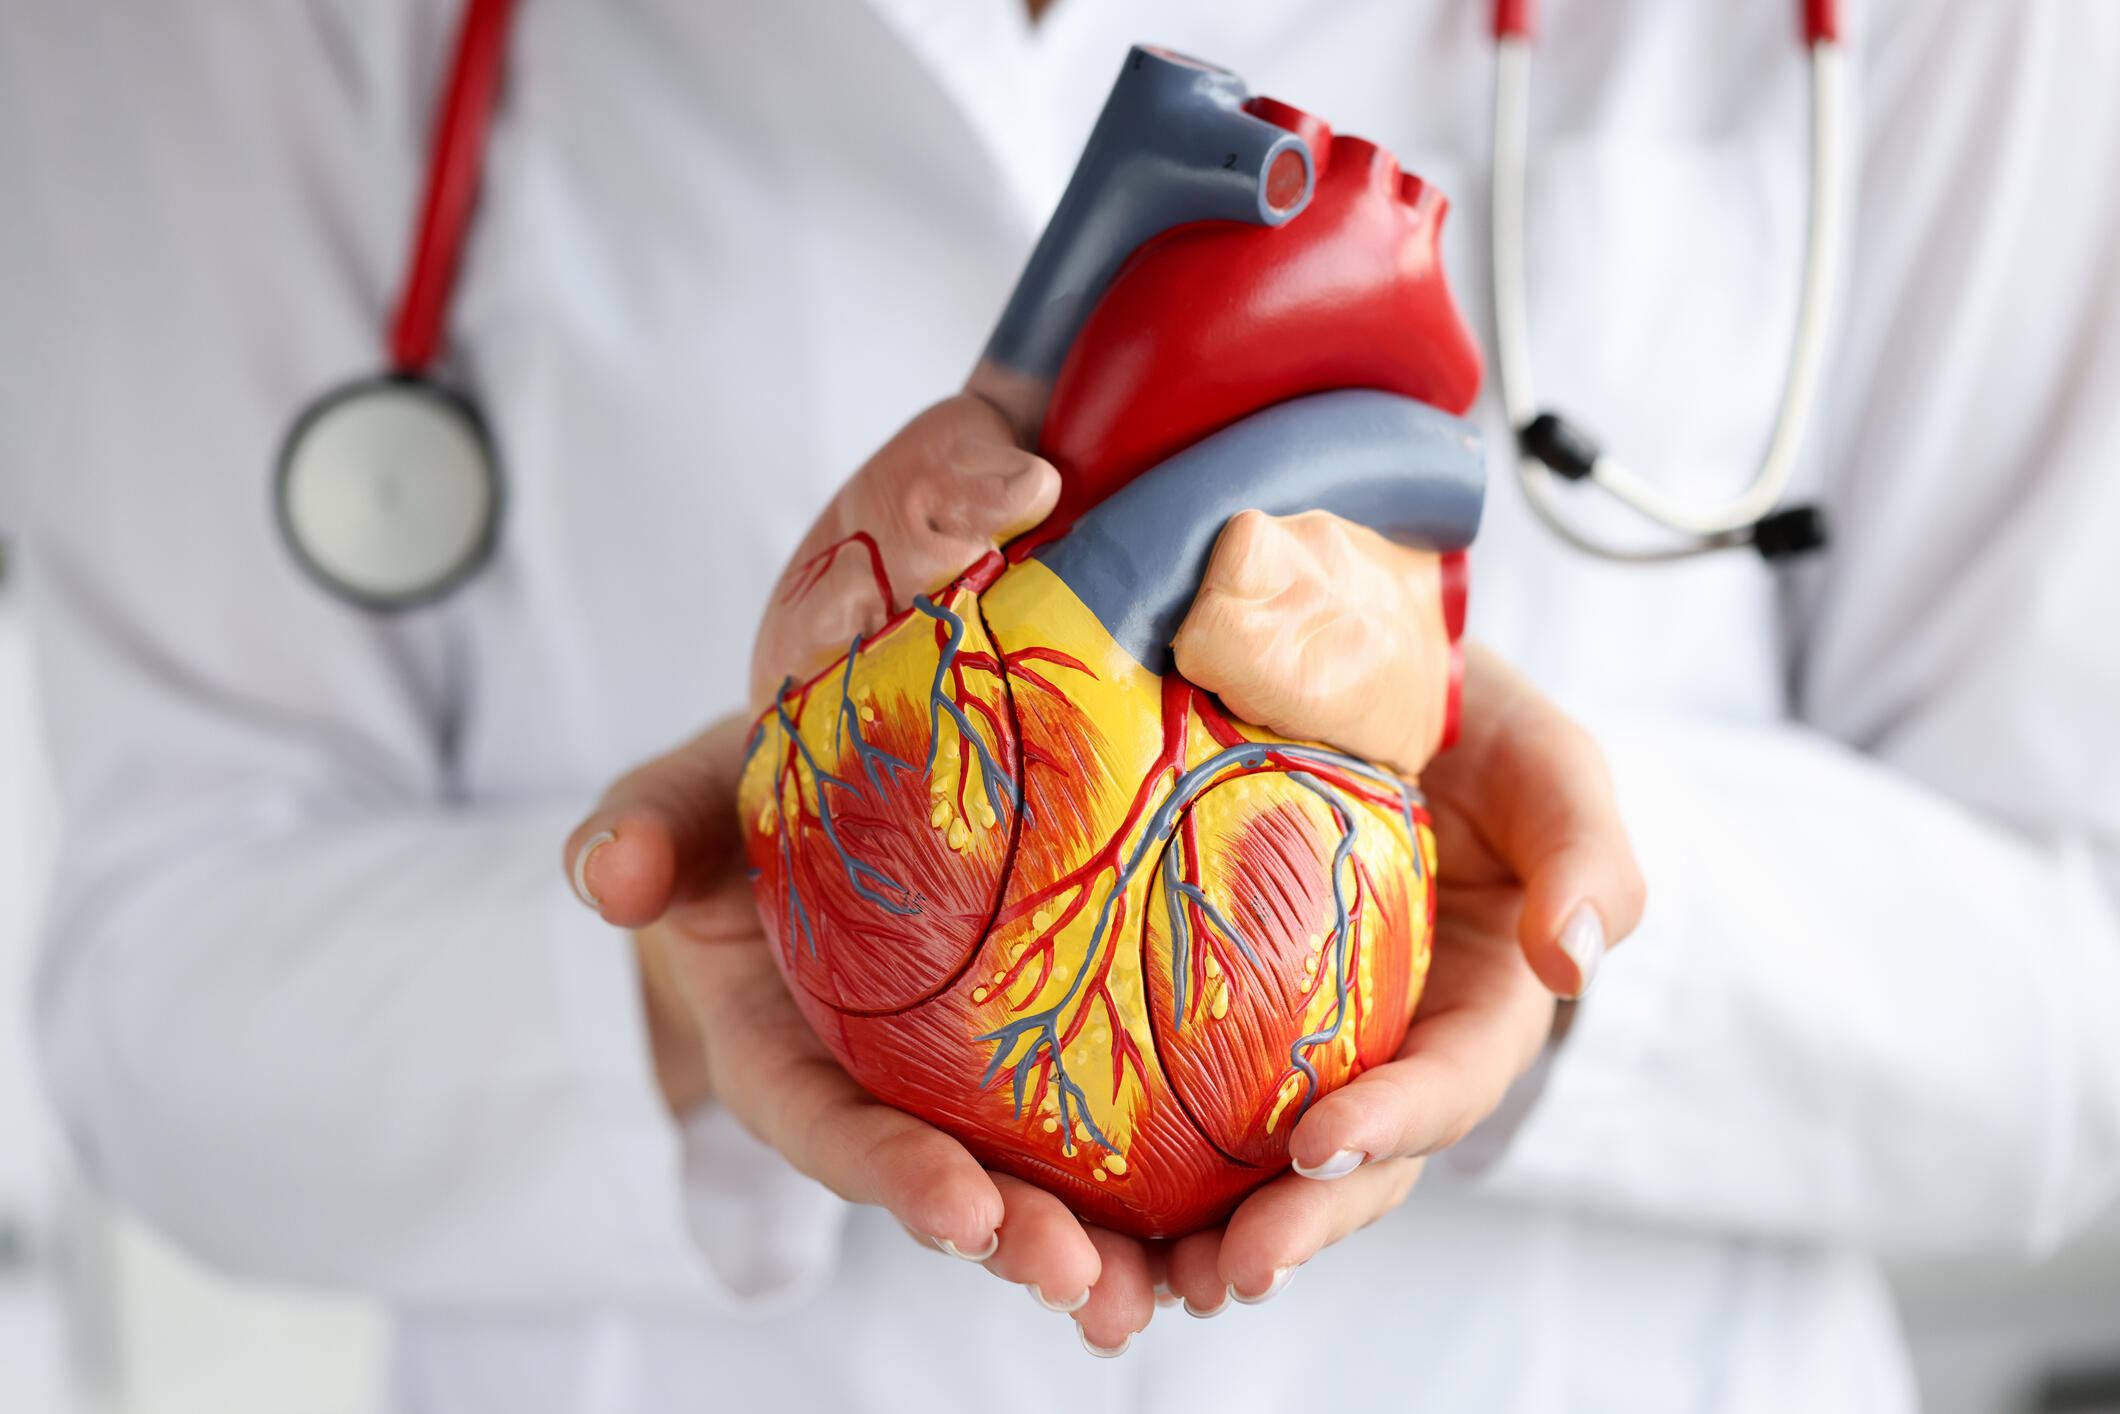 Multi-institutional project awarded $31M to study promising heart ...